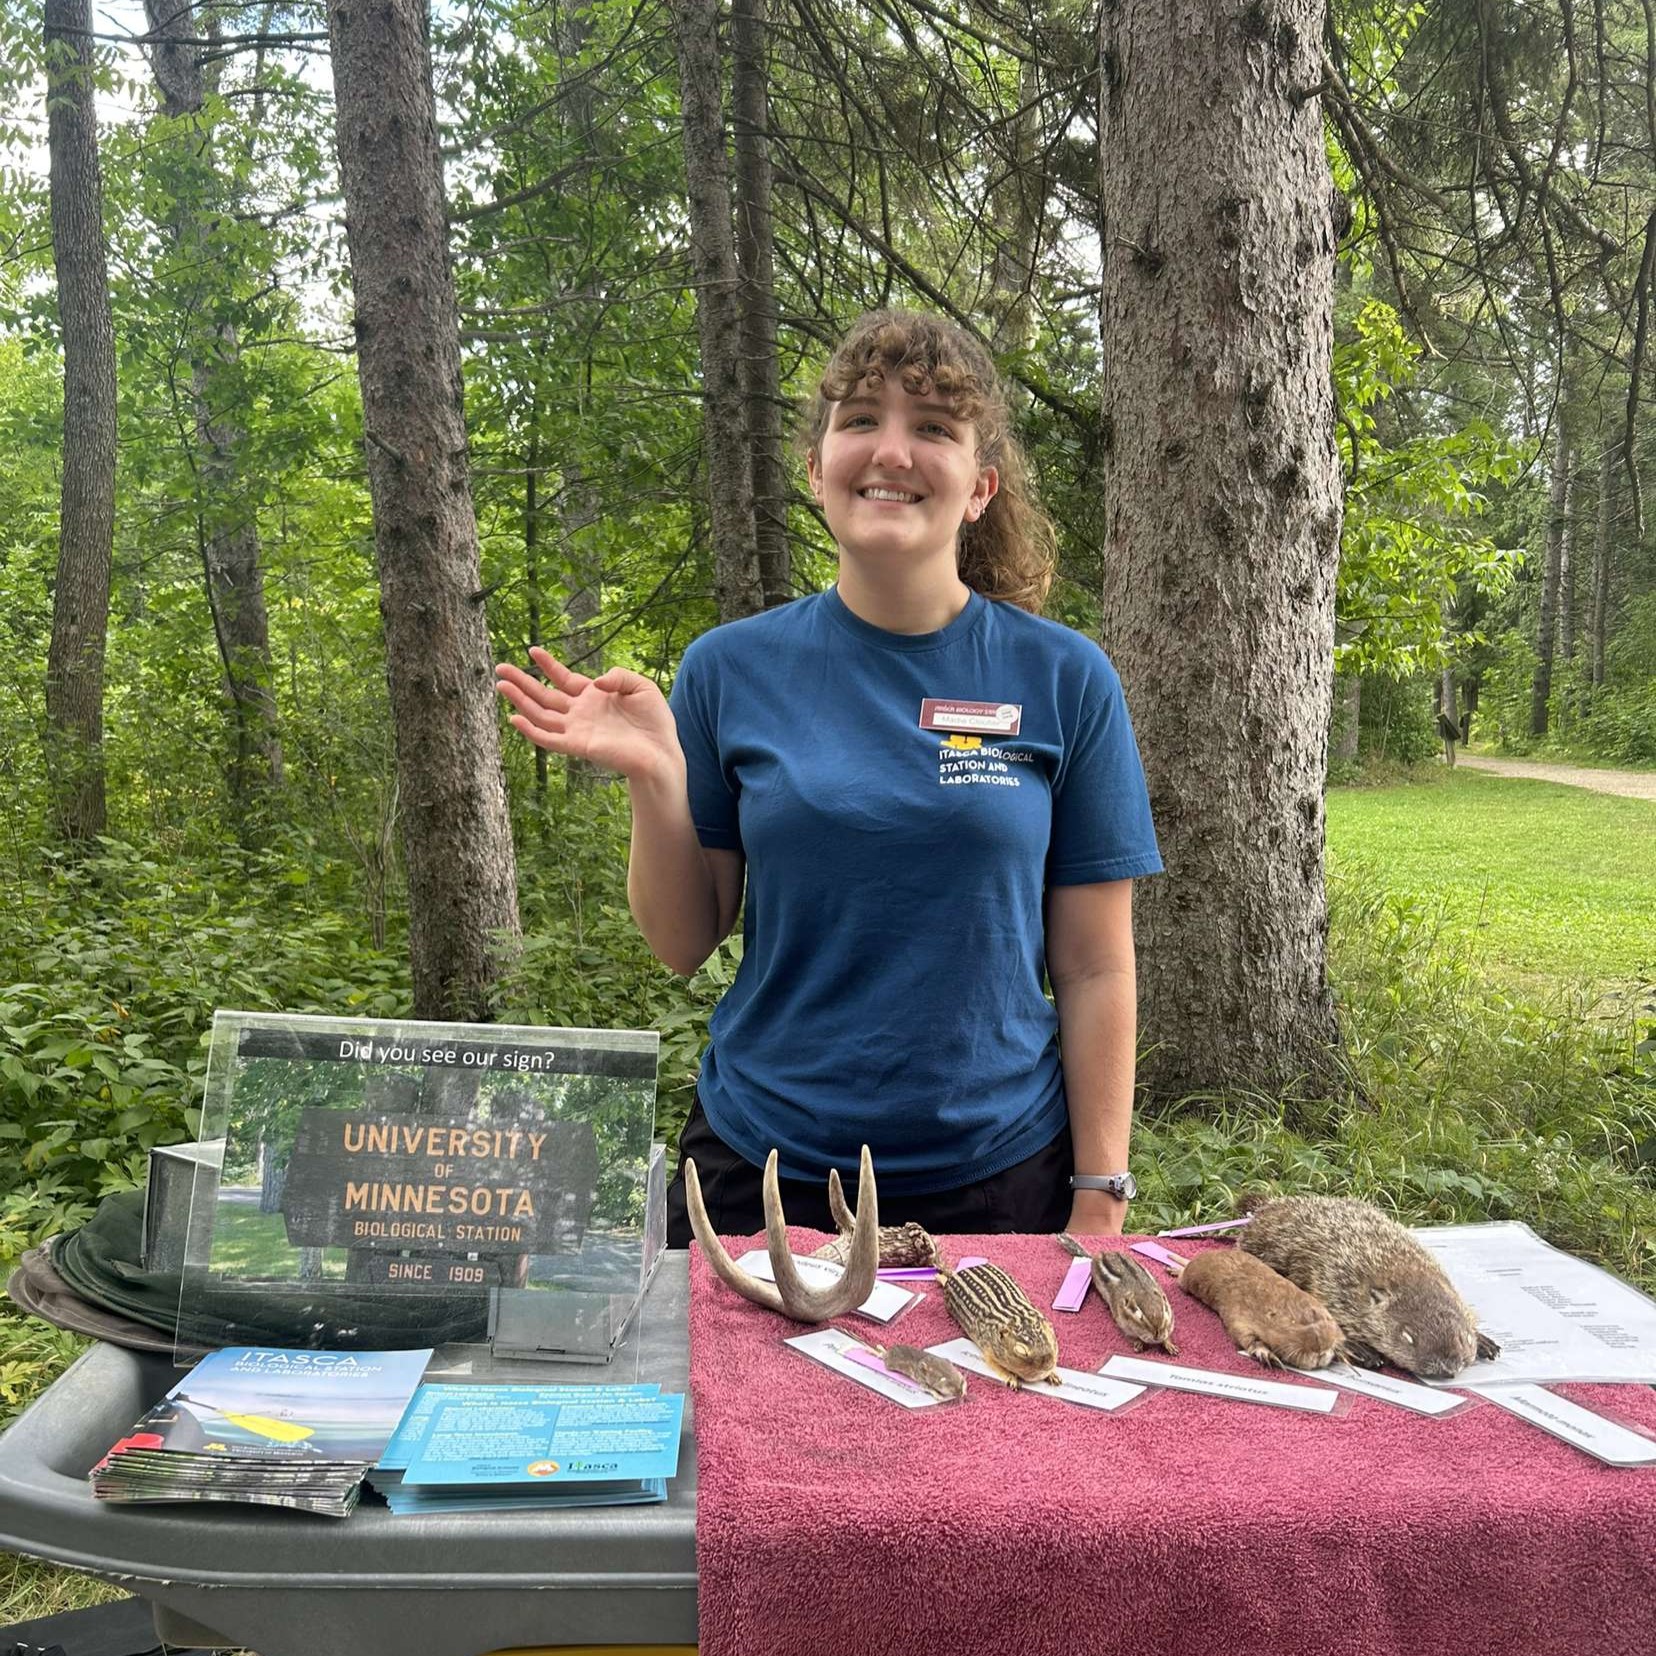 Itasca station intern welcoming people to a Nature Cart at Itasca State Park, with various mammal specimens on the cart.